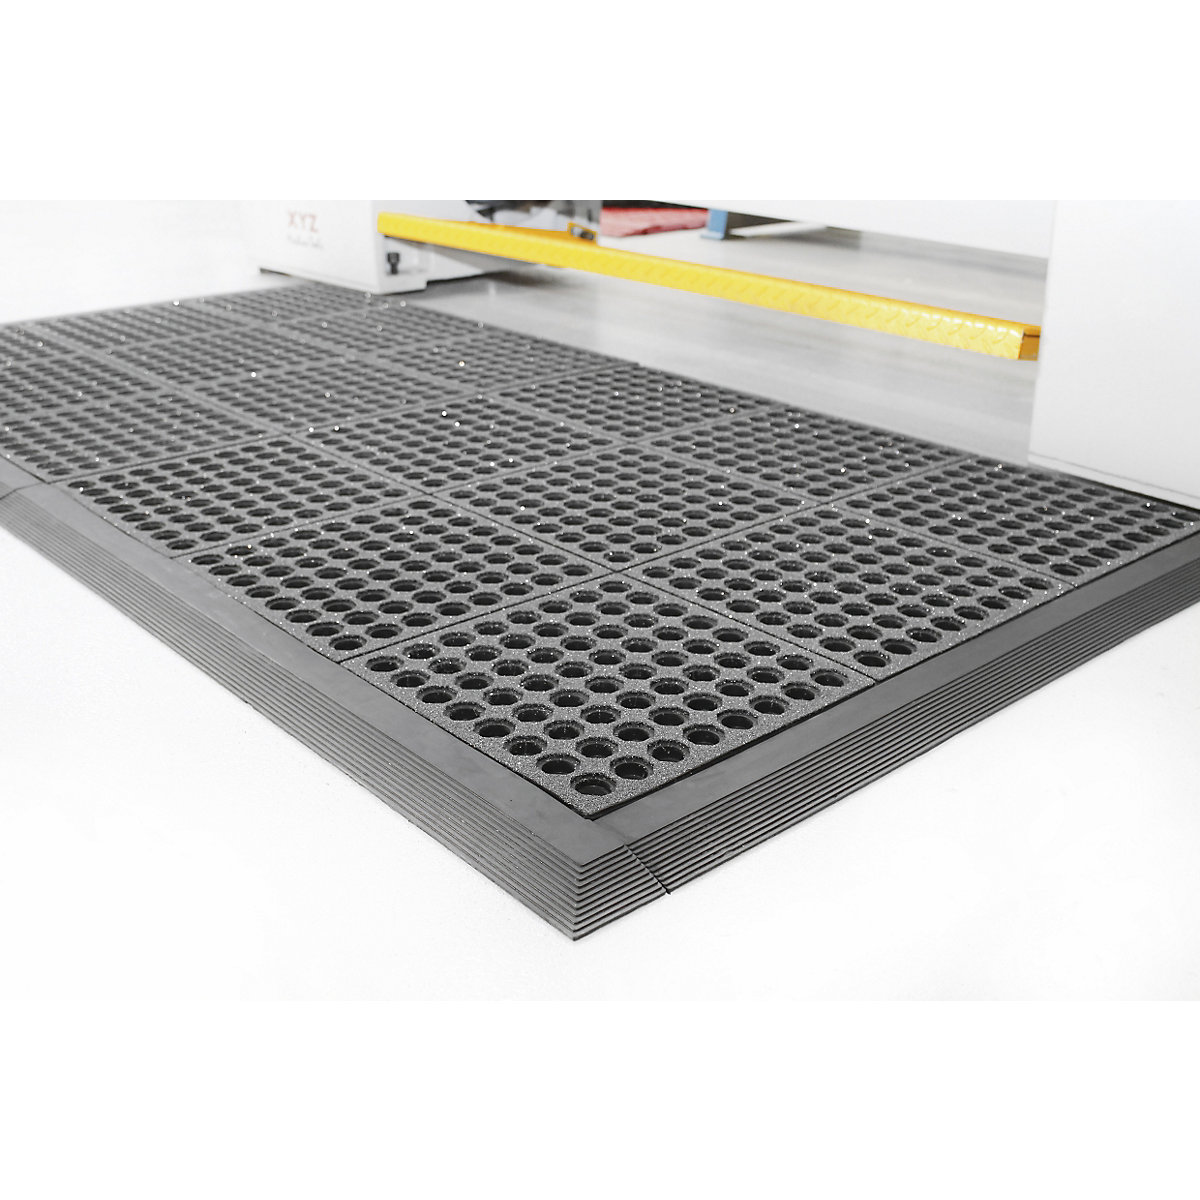 Solid Fatigue-Step workstation floor covering, perforated model, height 19 mm